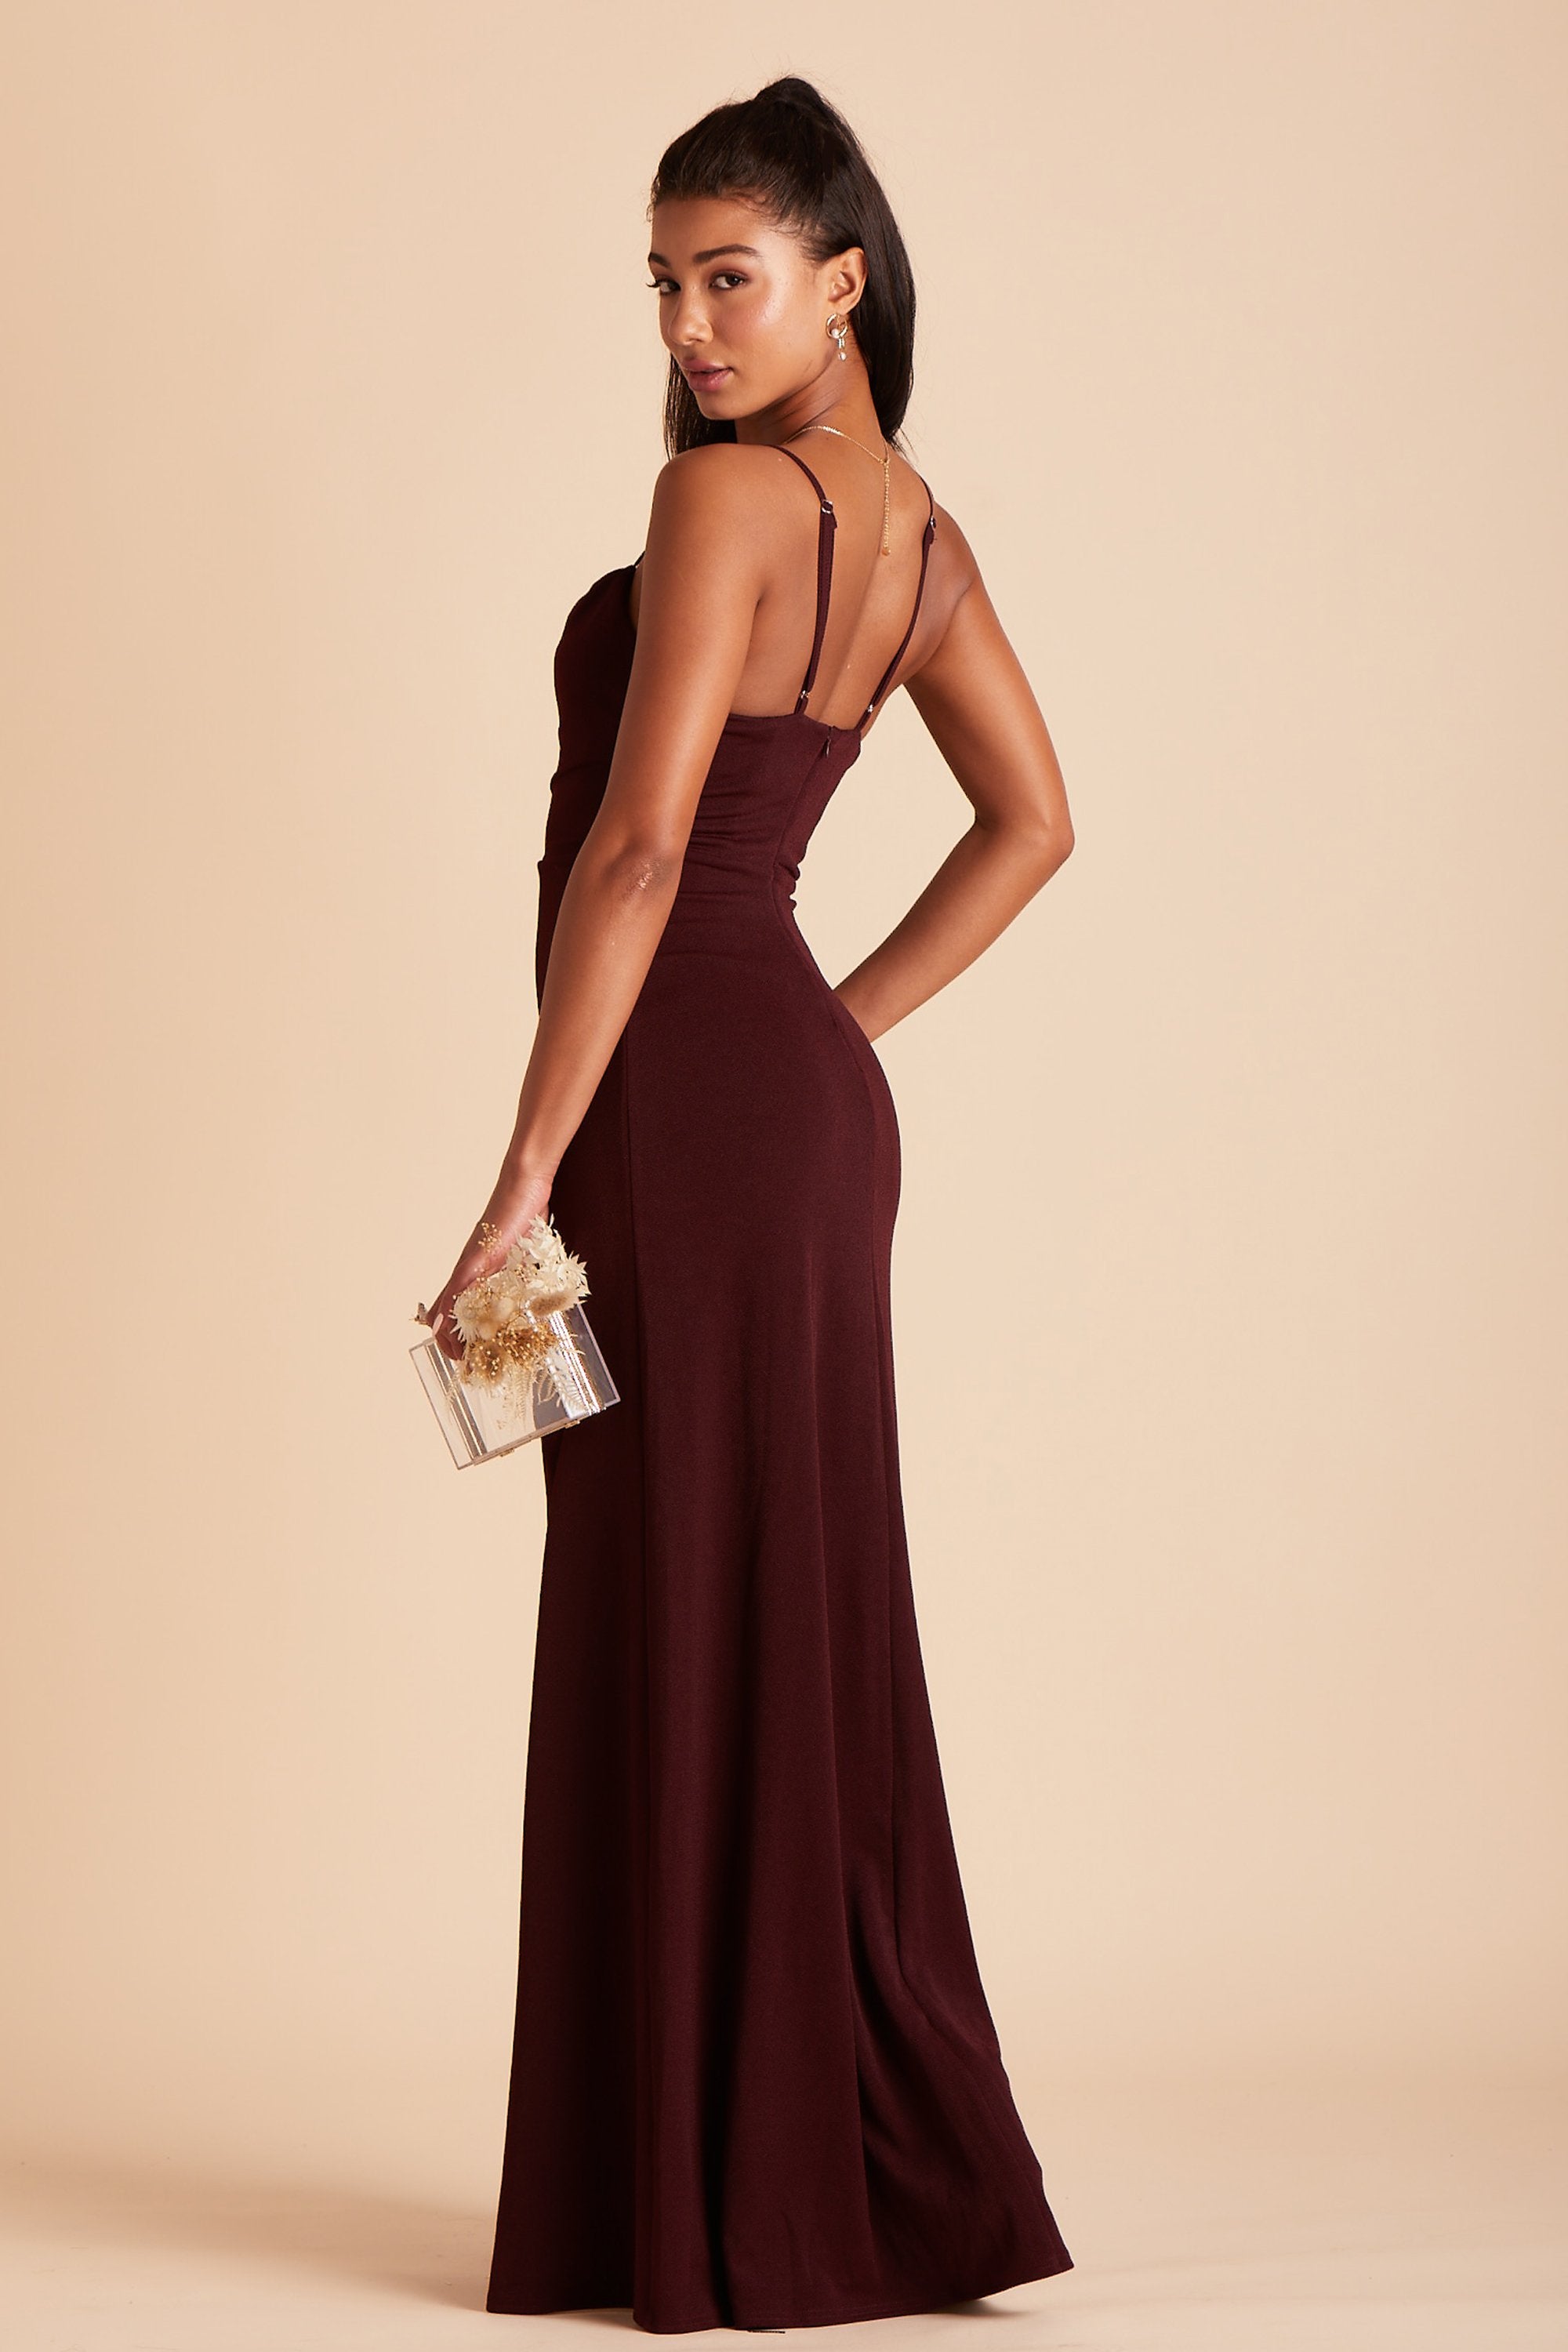 Ash bridesmaid dress in cabernet burgundy crepe by Birdy Grey, side view